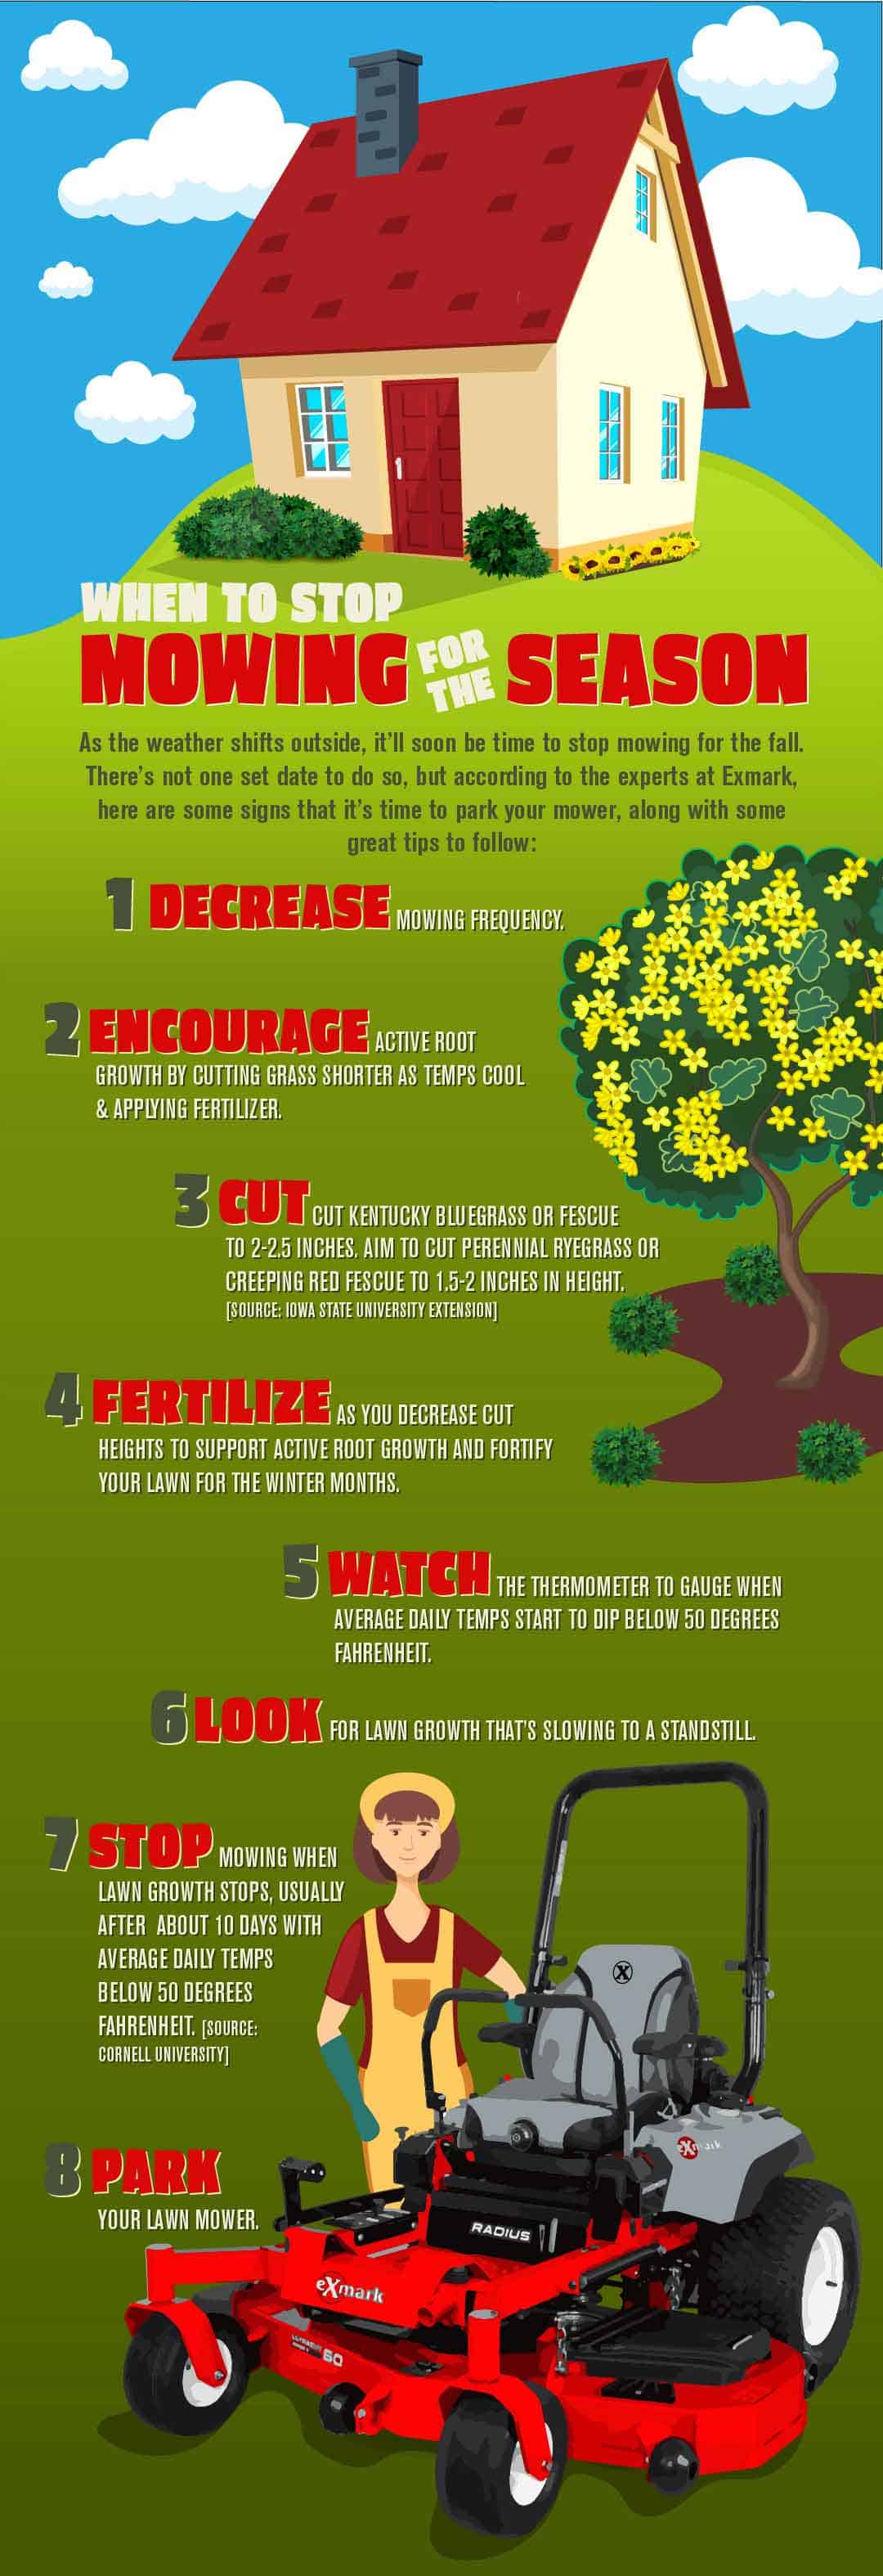 When to stop mowing for the season infographic with tips for fall lawn care